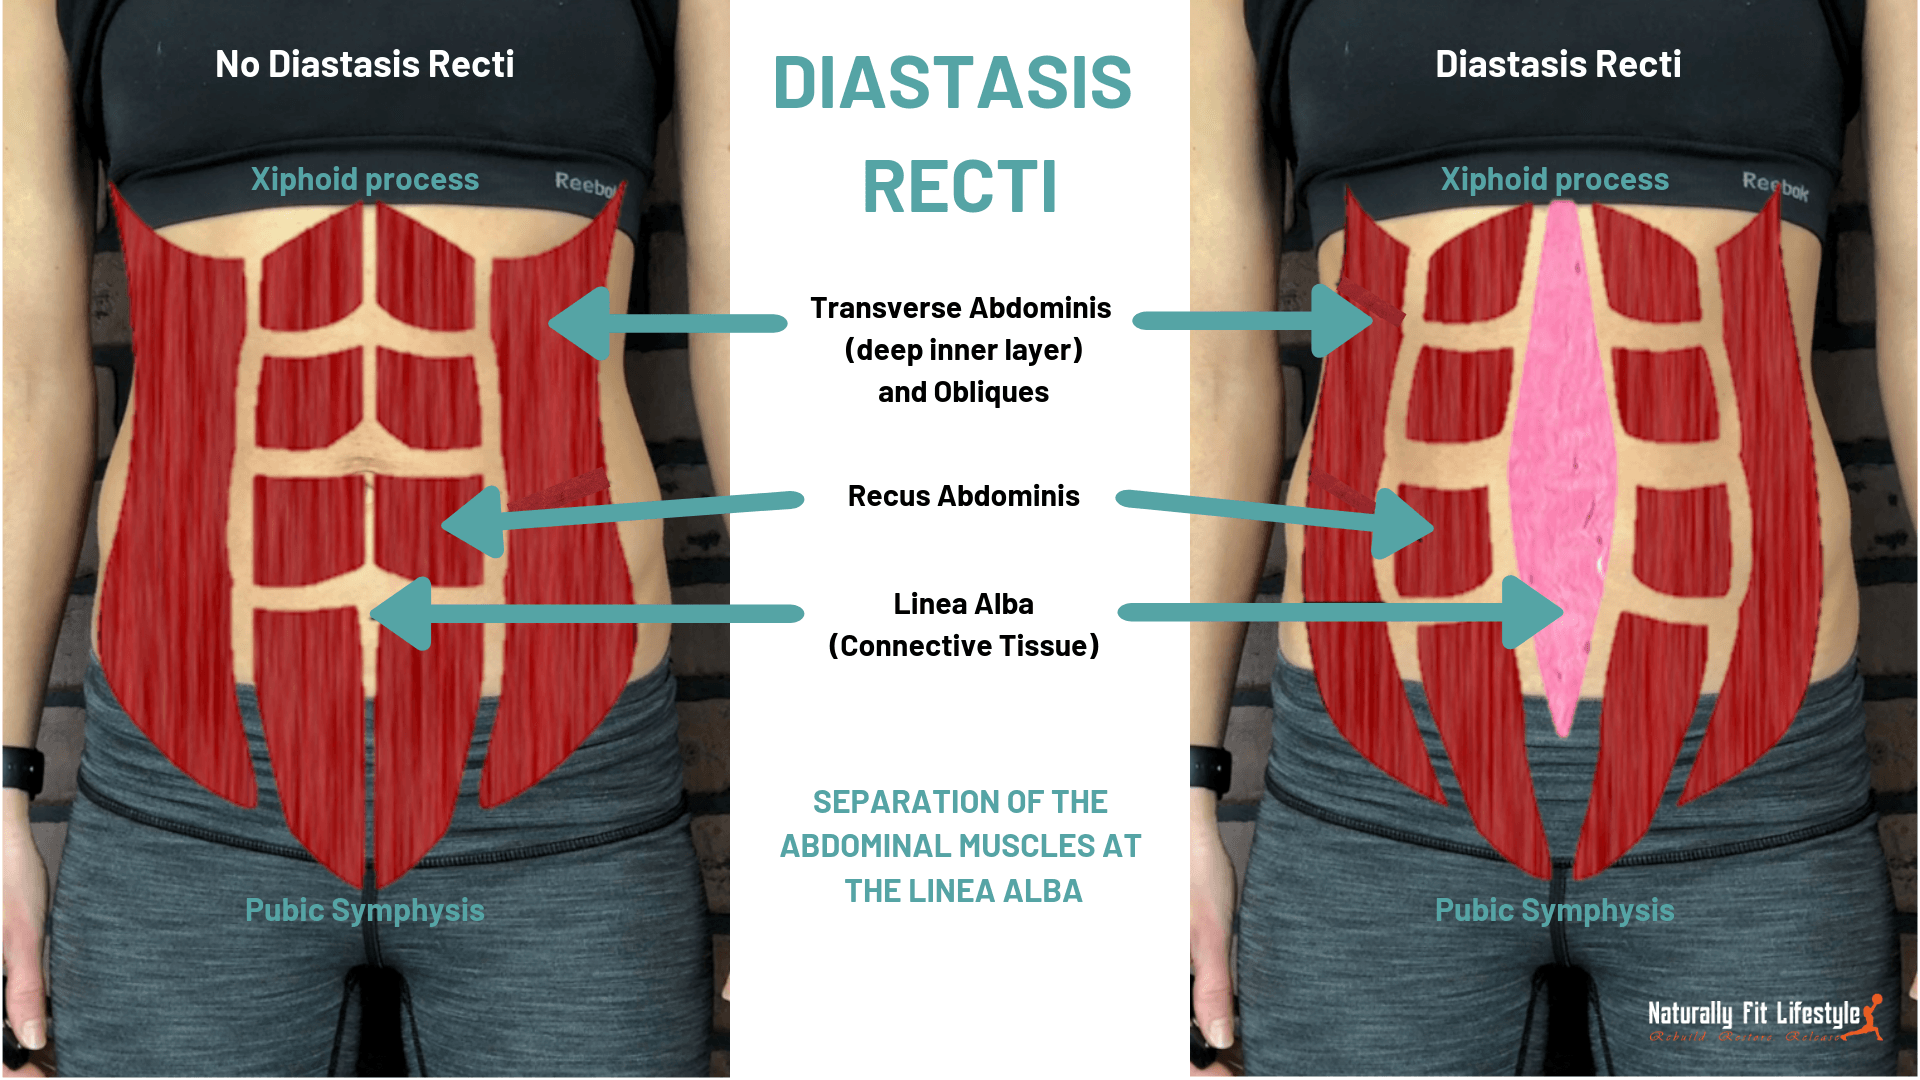 How to Measure your Diastasis Recti Size in Finger Spaces